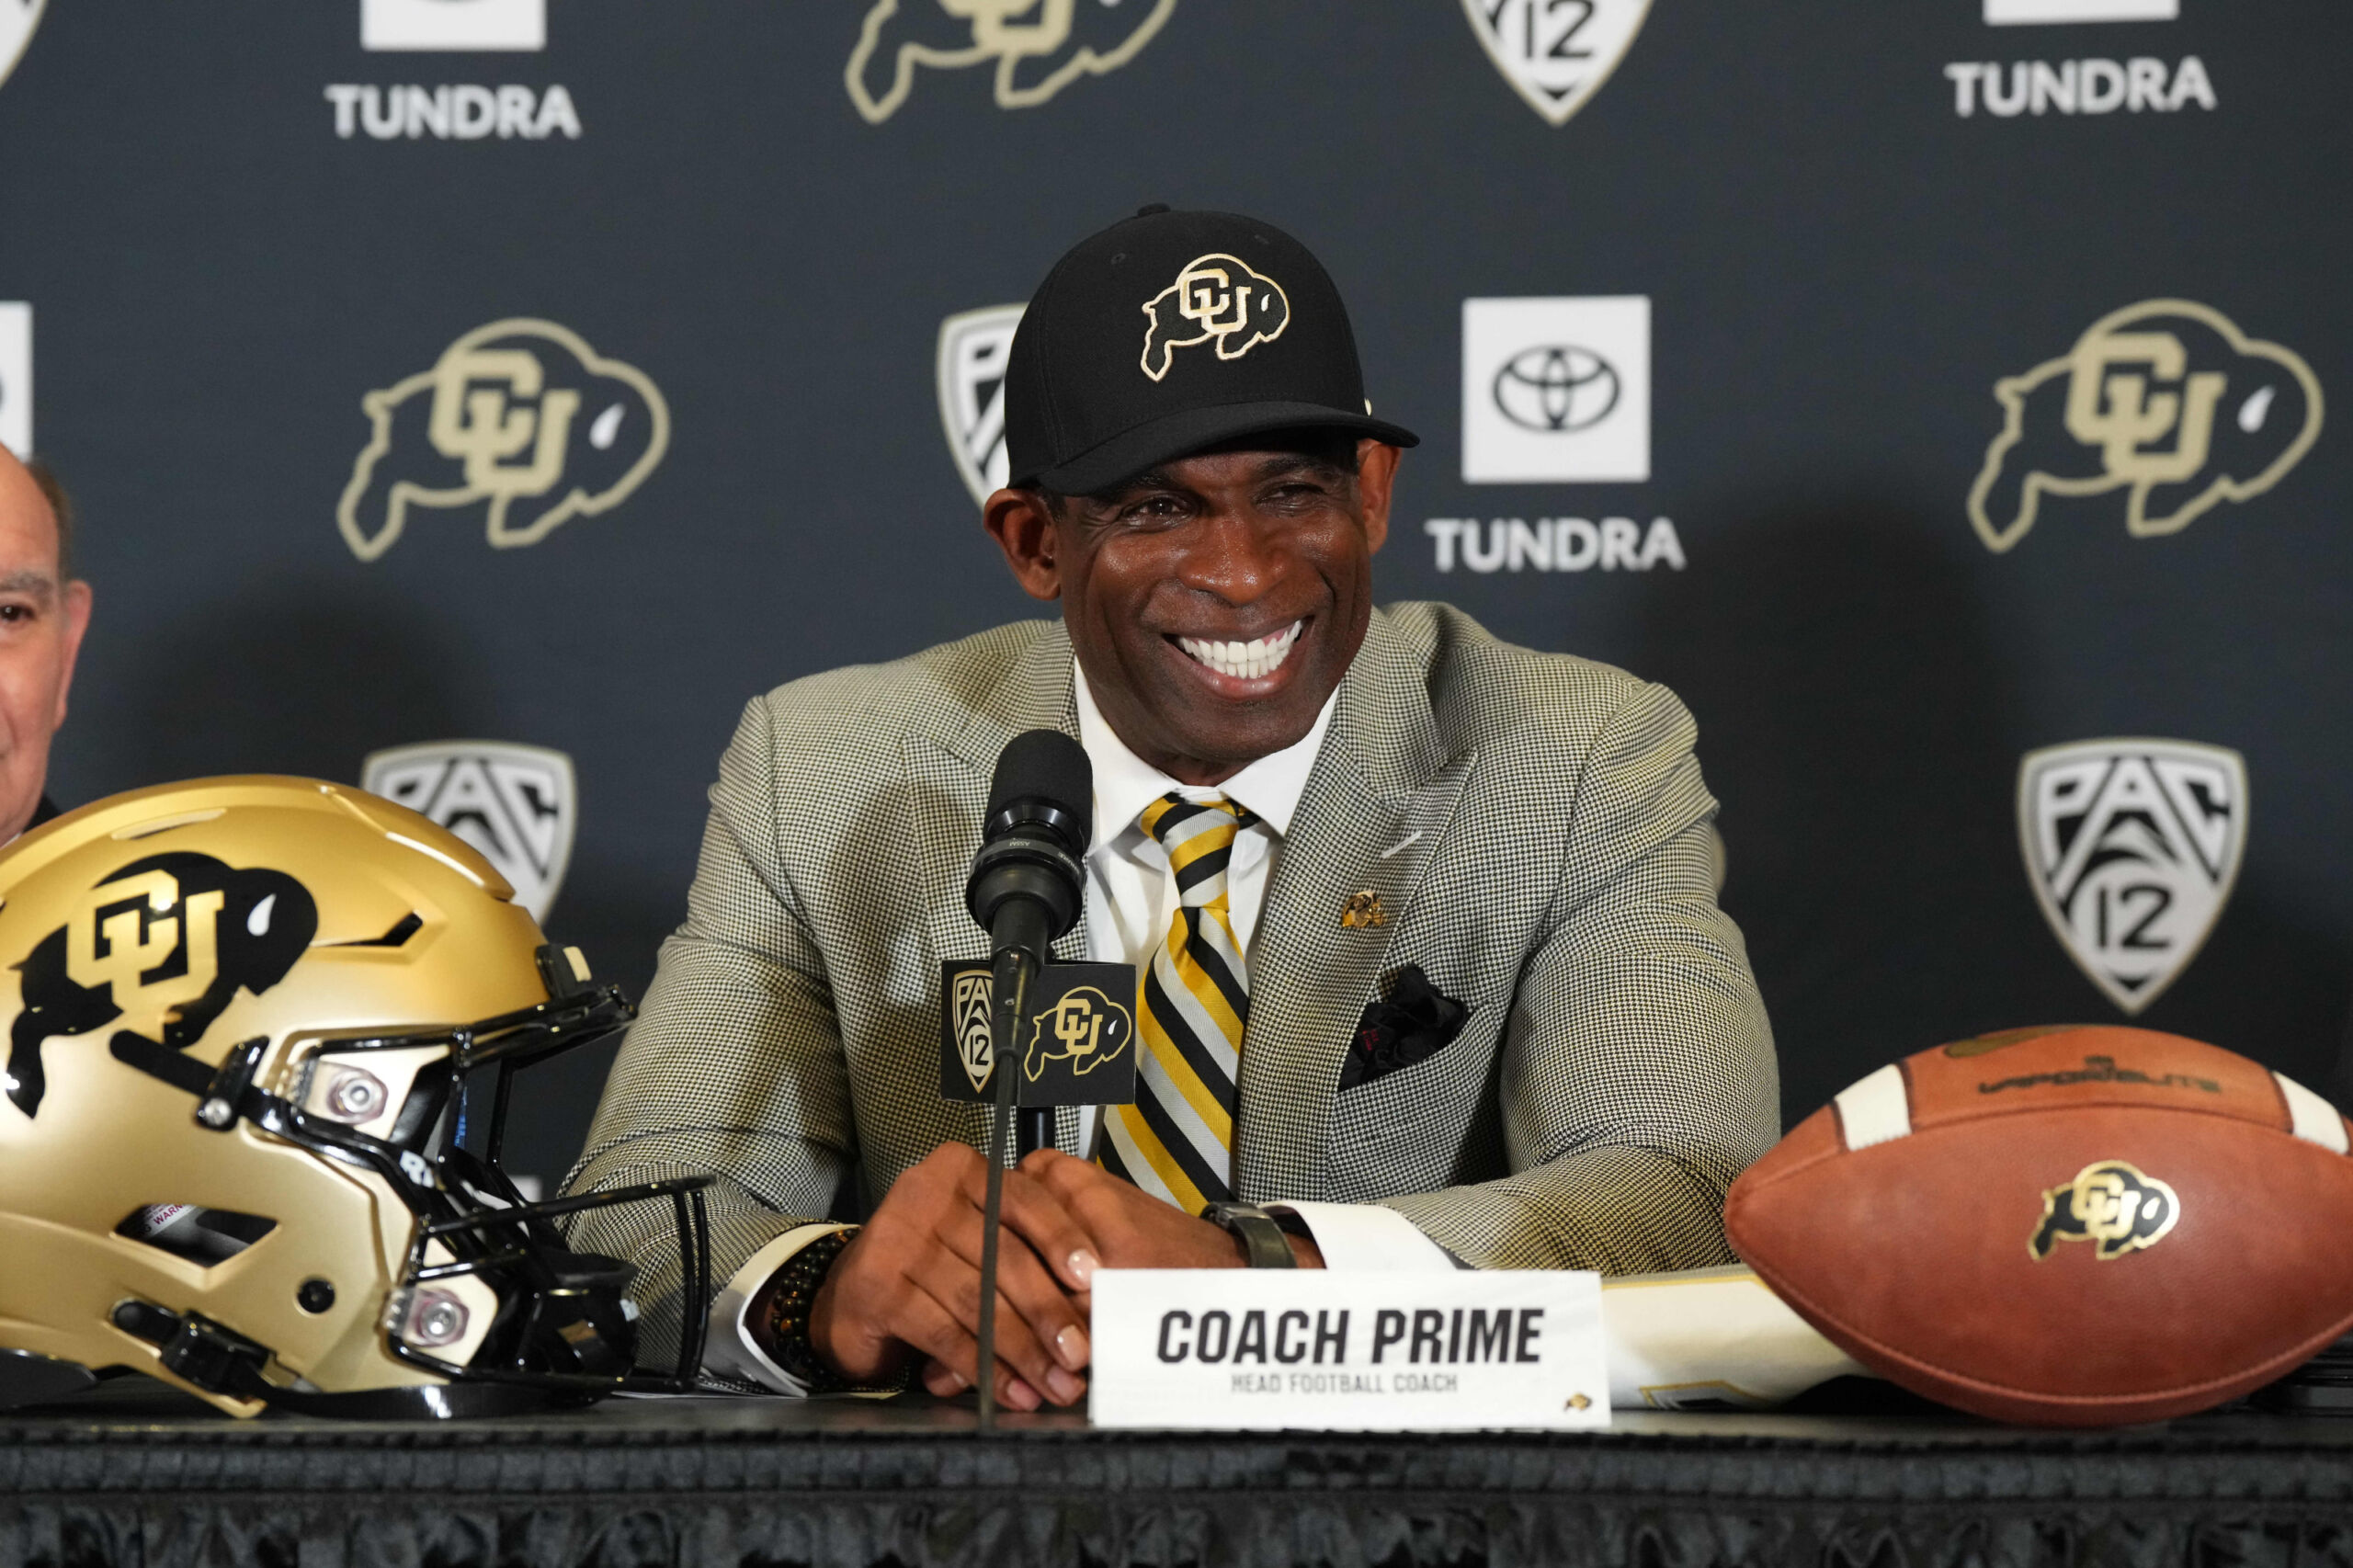 Deion Sanders thinks he could have been a star in a third sport